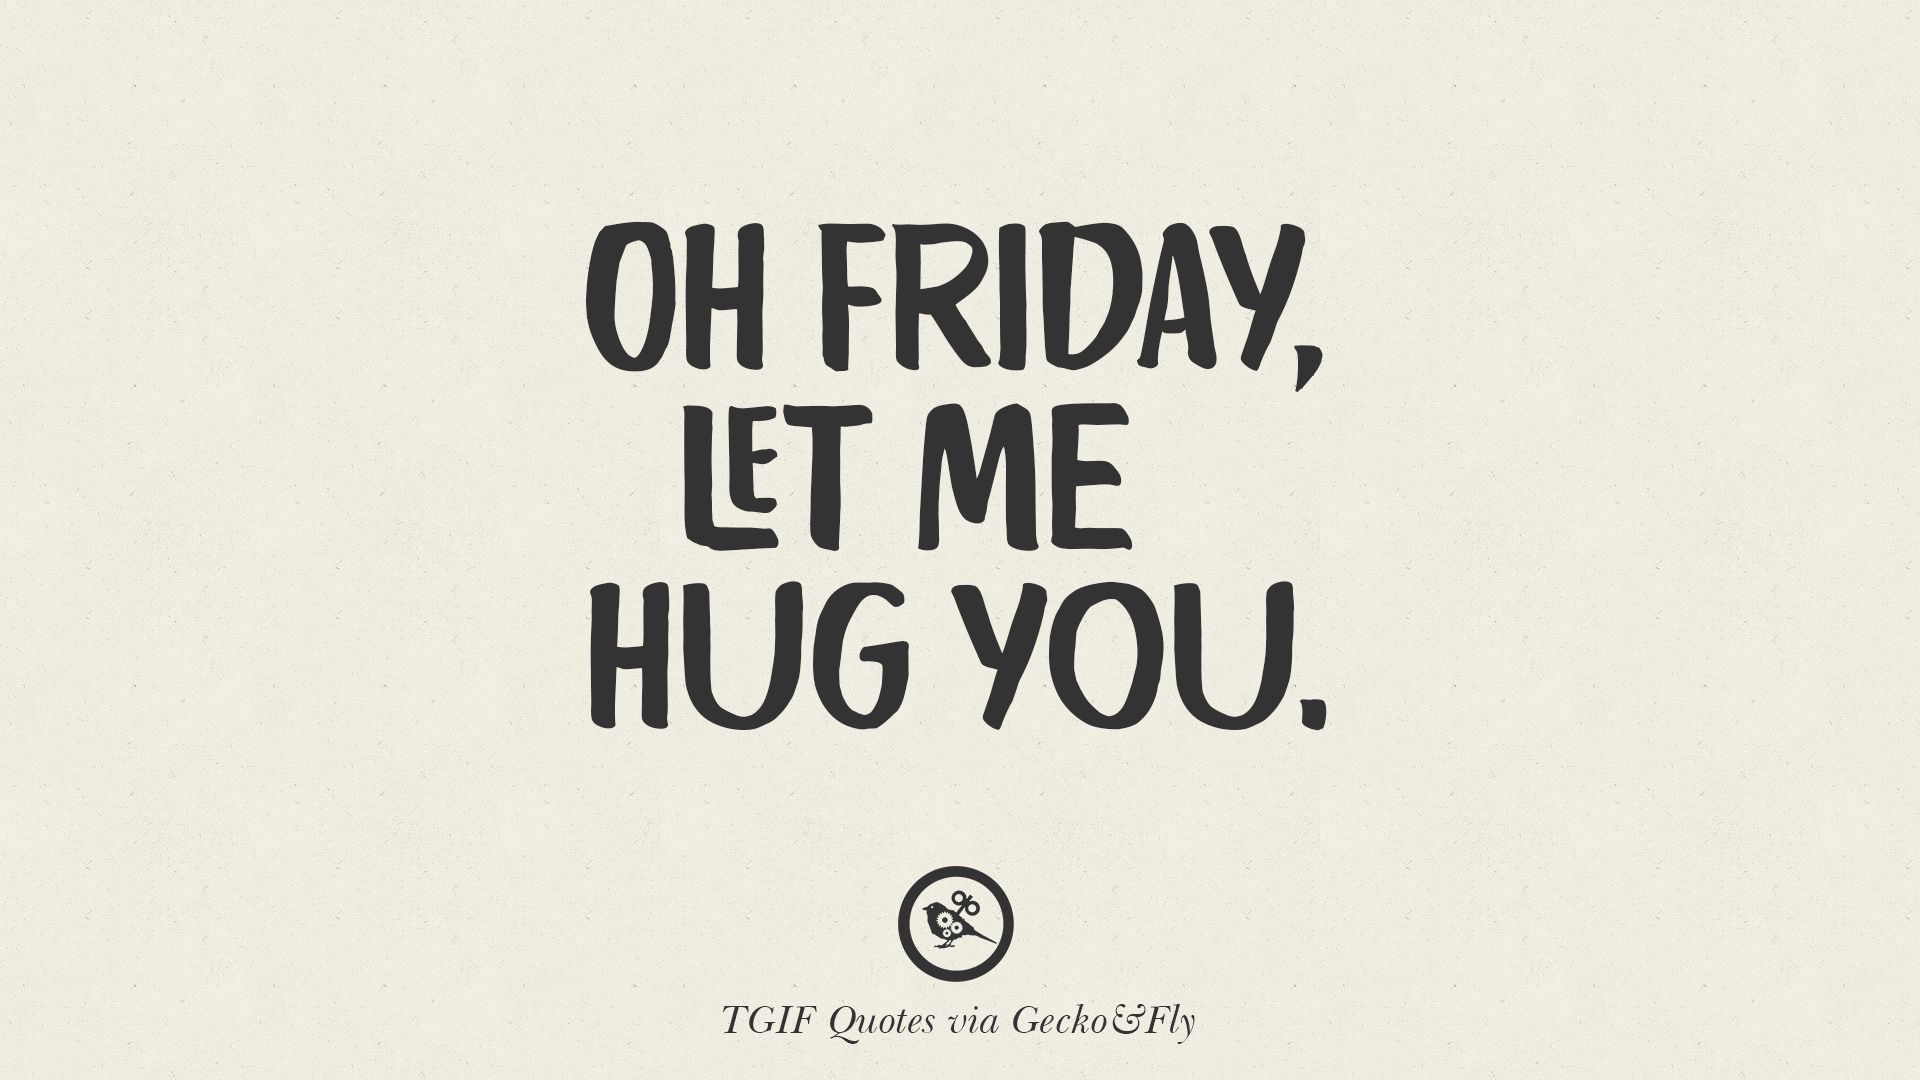 TGIF [ Thank God It's Friday ] Meme Quotes & Messages